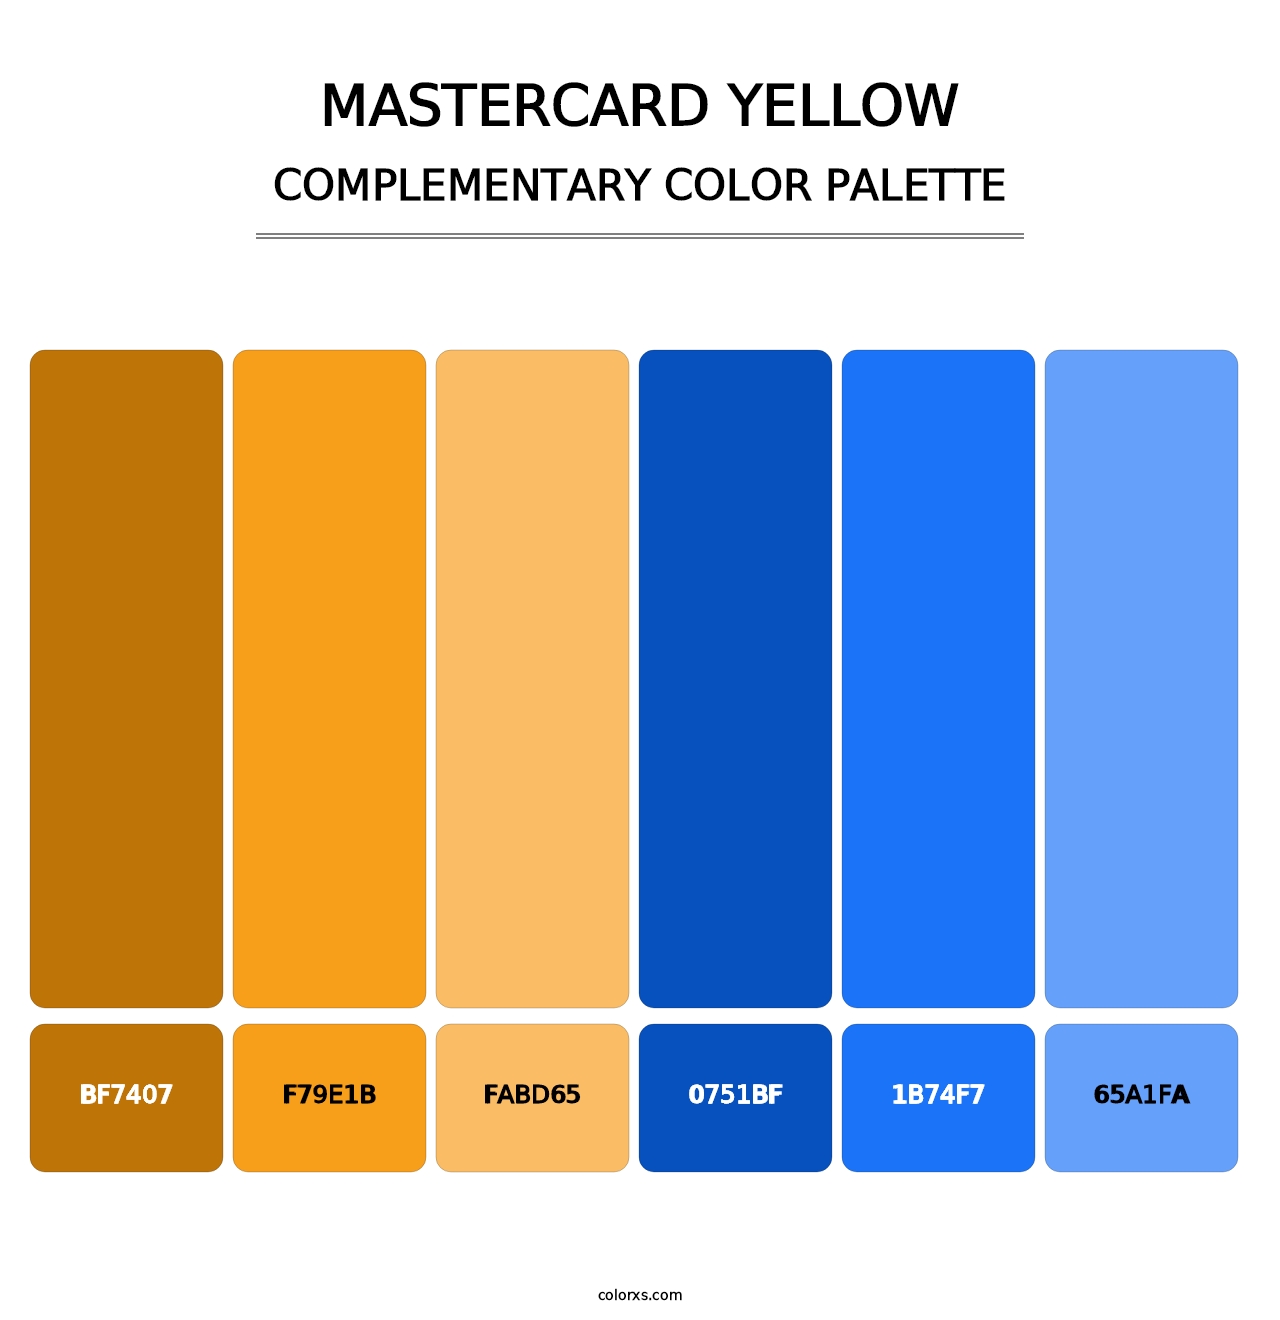 Mastercard Yellow - Complementary Color Palette